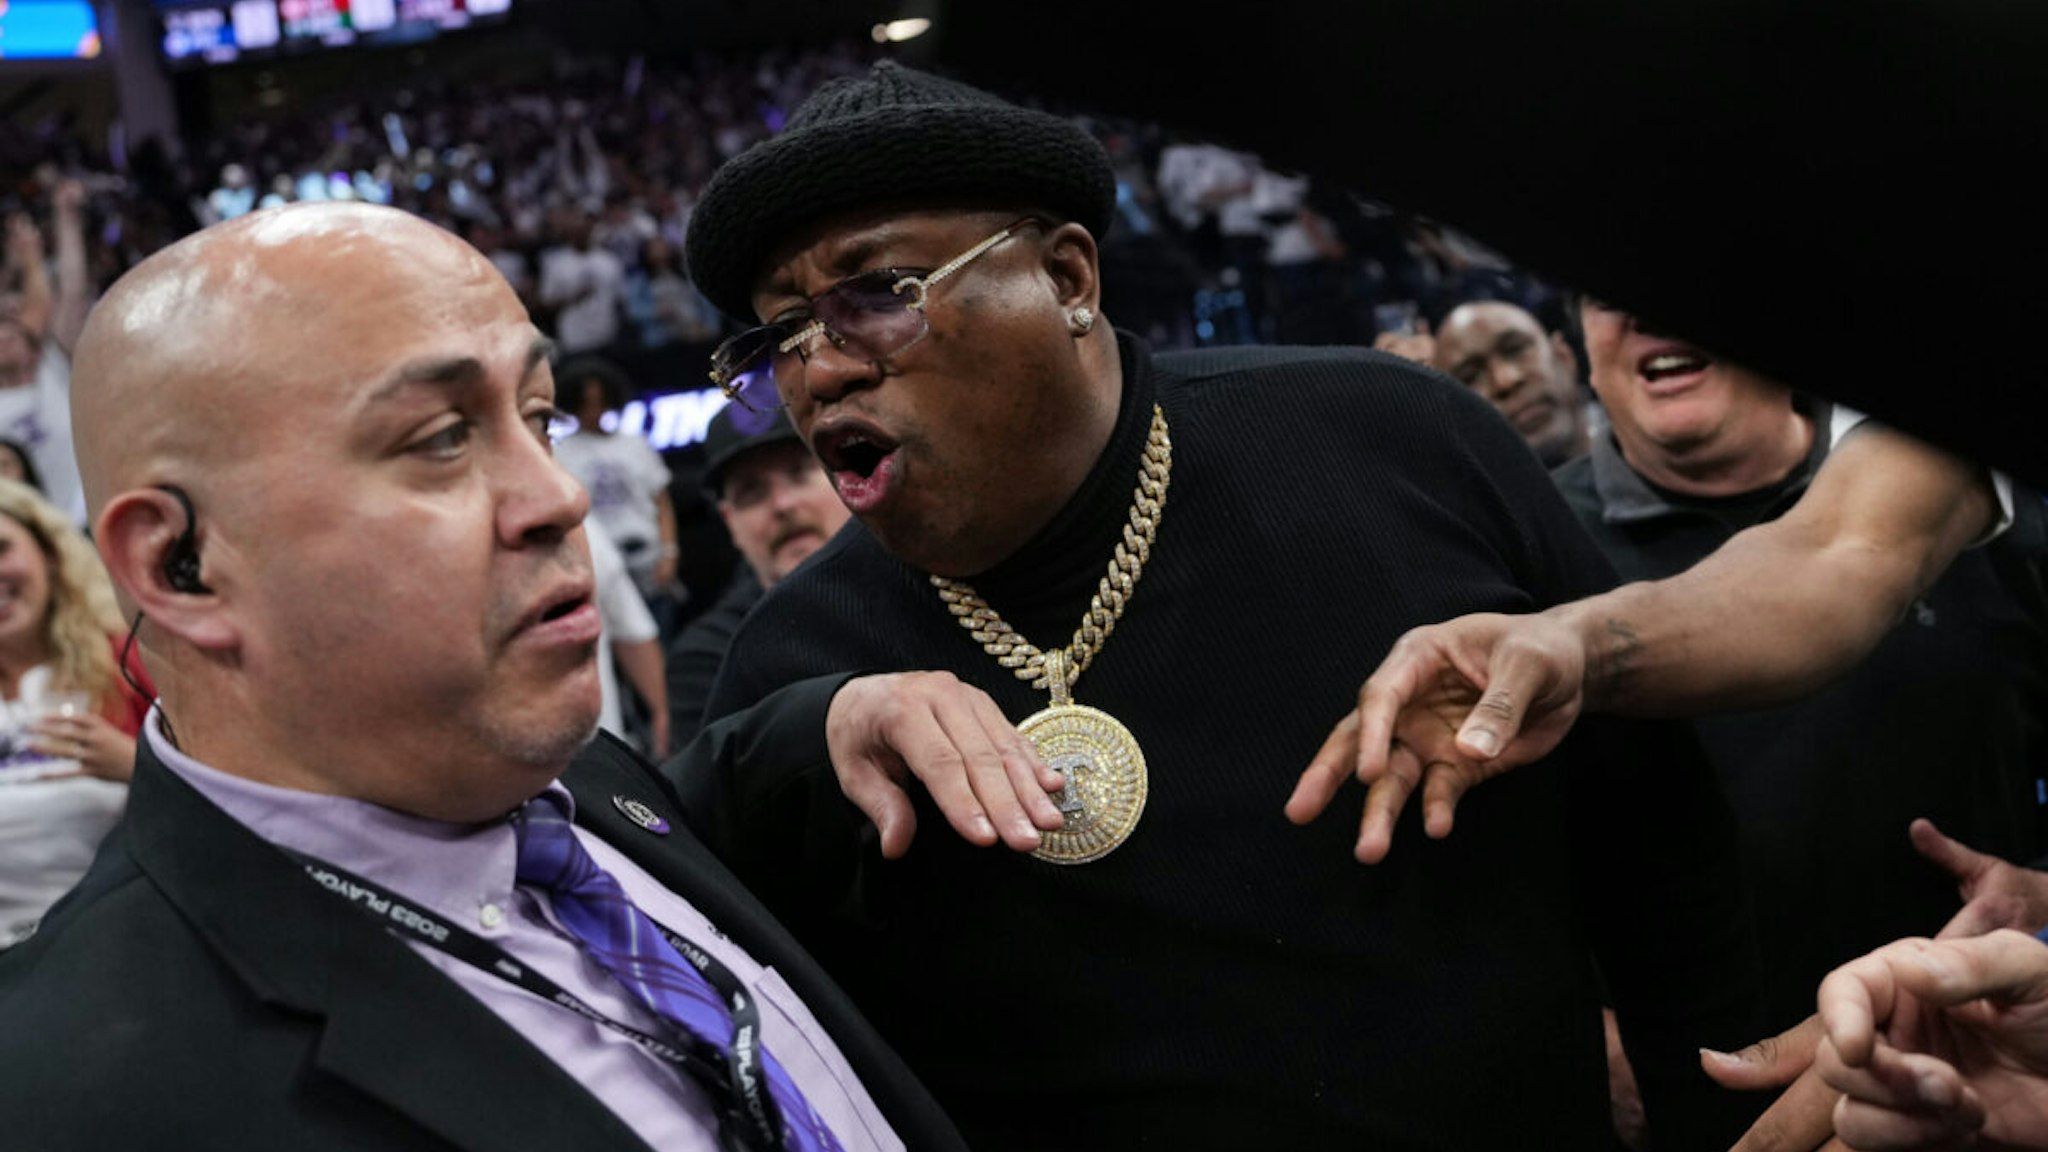 Earl Tywone Stevens Sr., known as the rapper E-40, yells at arena security personnel before being escorted from courtside seating during Game One of the Western Conference First Round Playoffs between the Golden State Warriors and Sacramento Kings at the Golden 1 Center on April 15, 2023 in Sacramento, California.